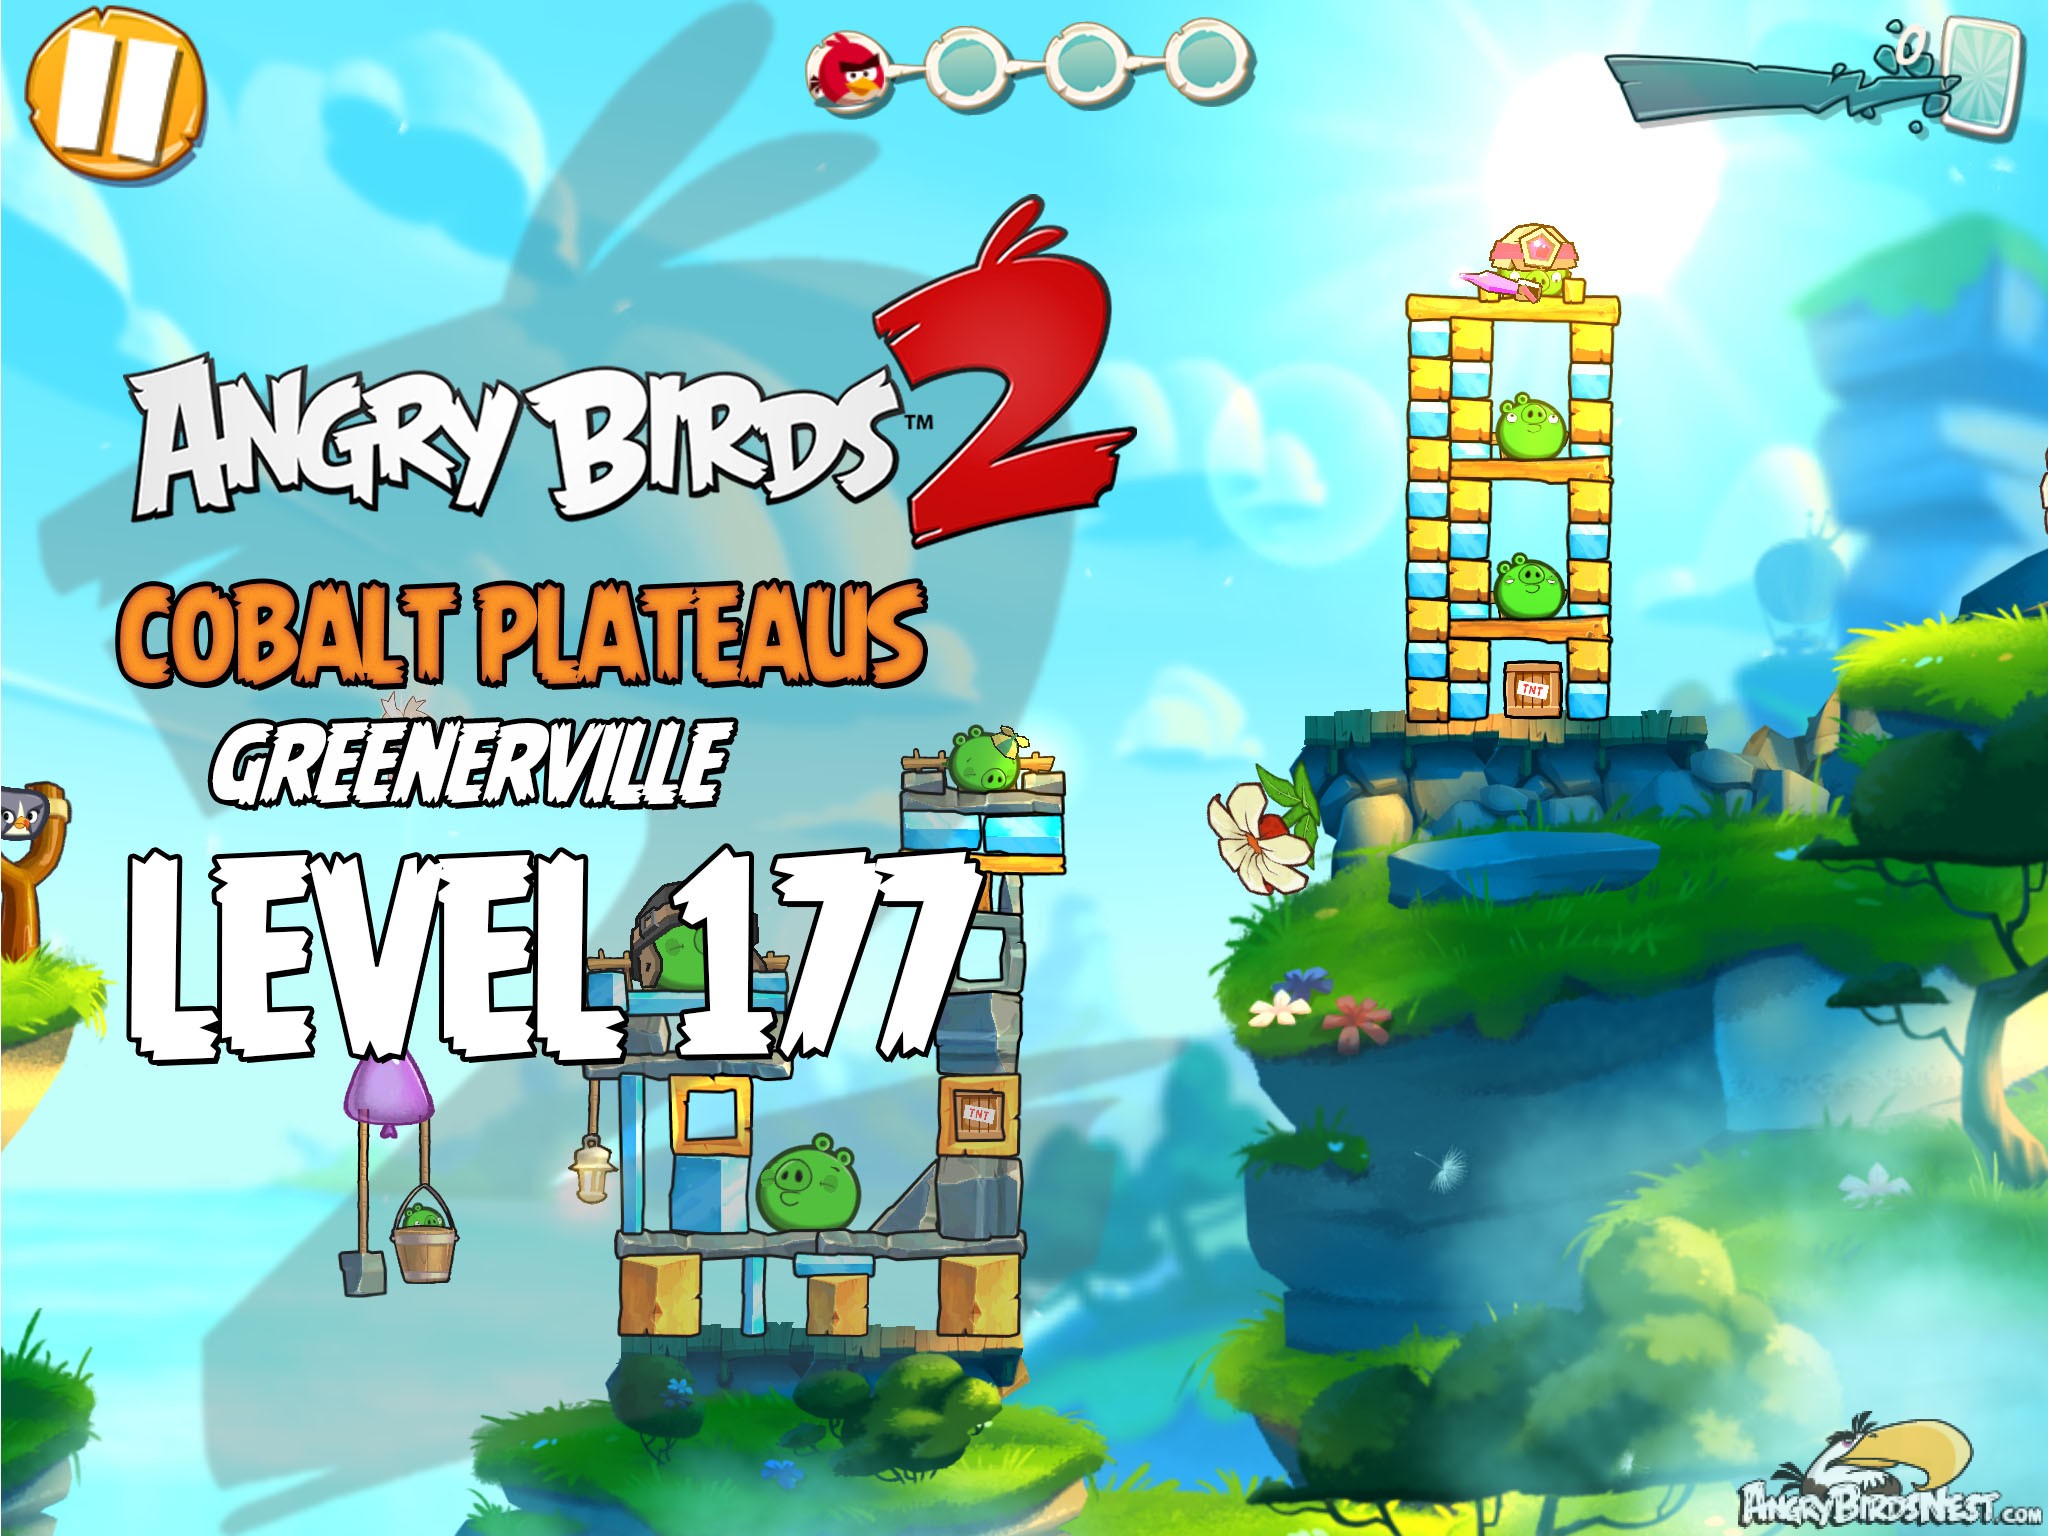 Angry Birds 2 Cobalt Plateaus Greenerville Level 177